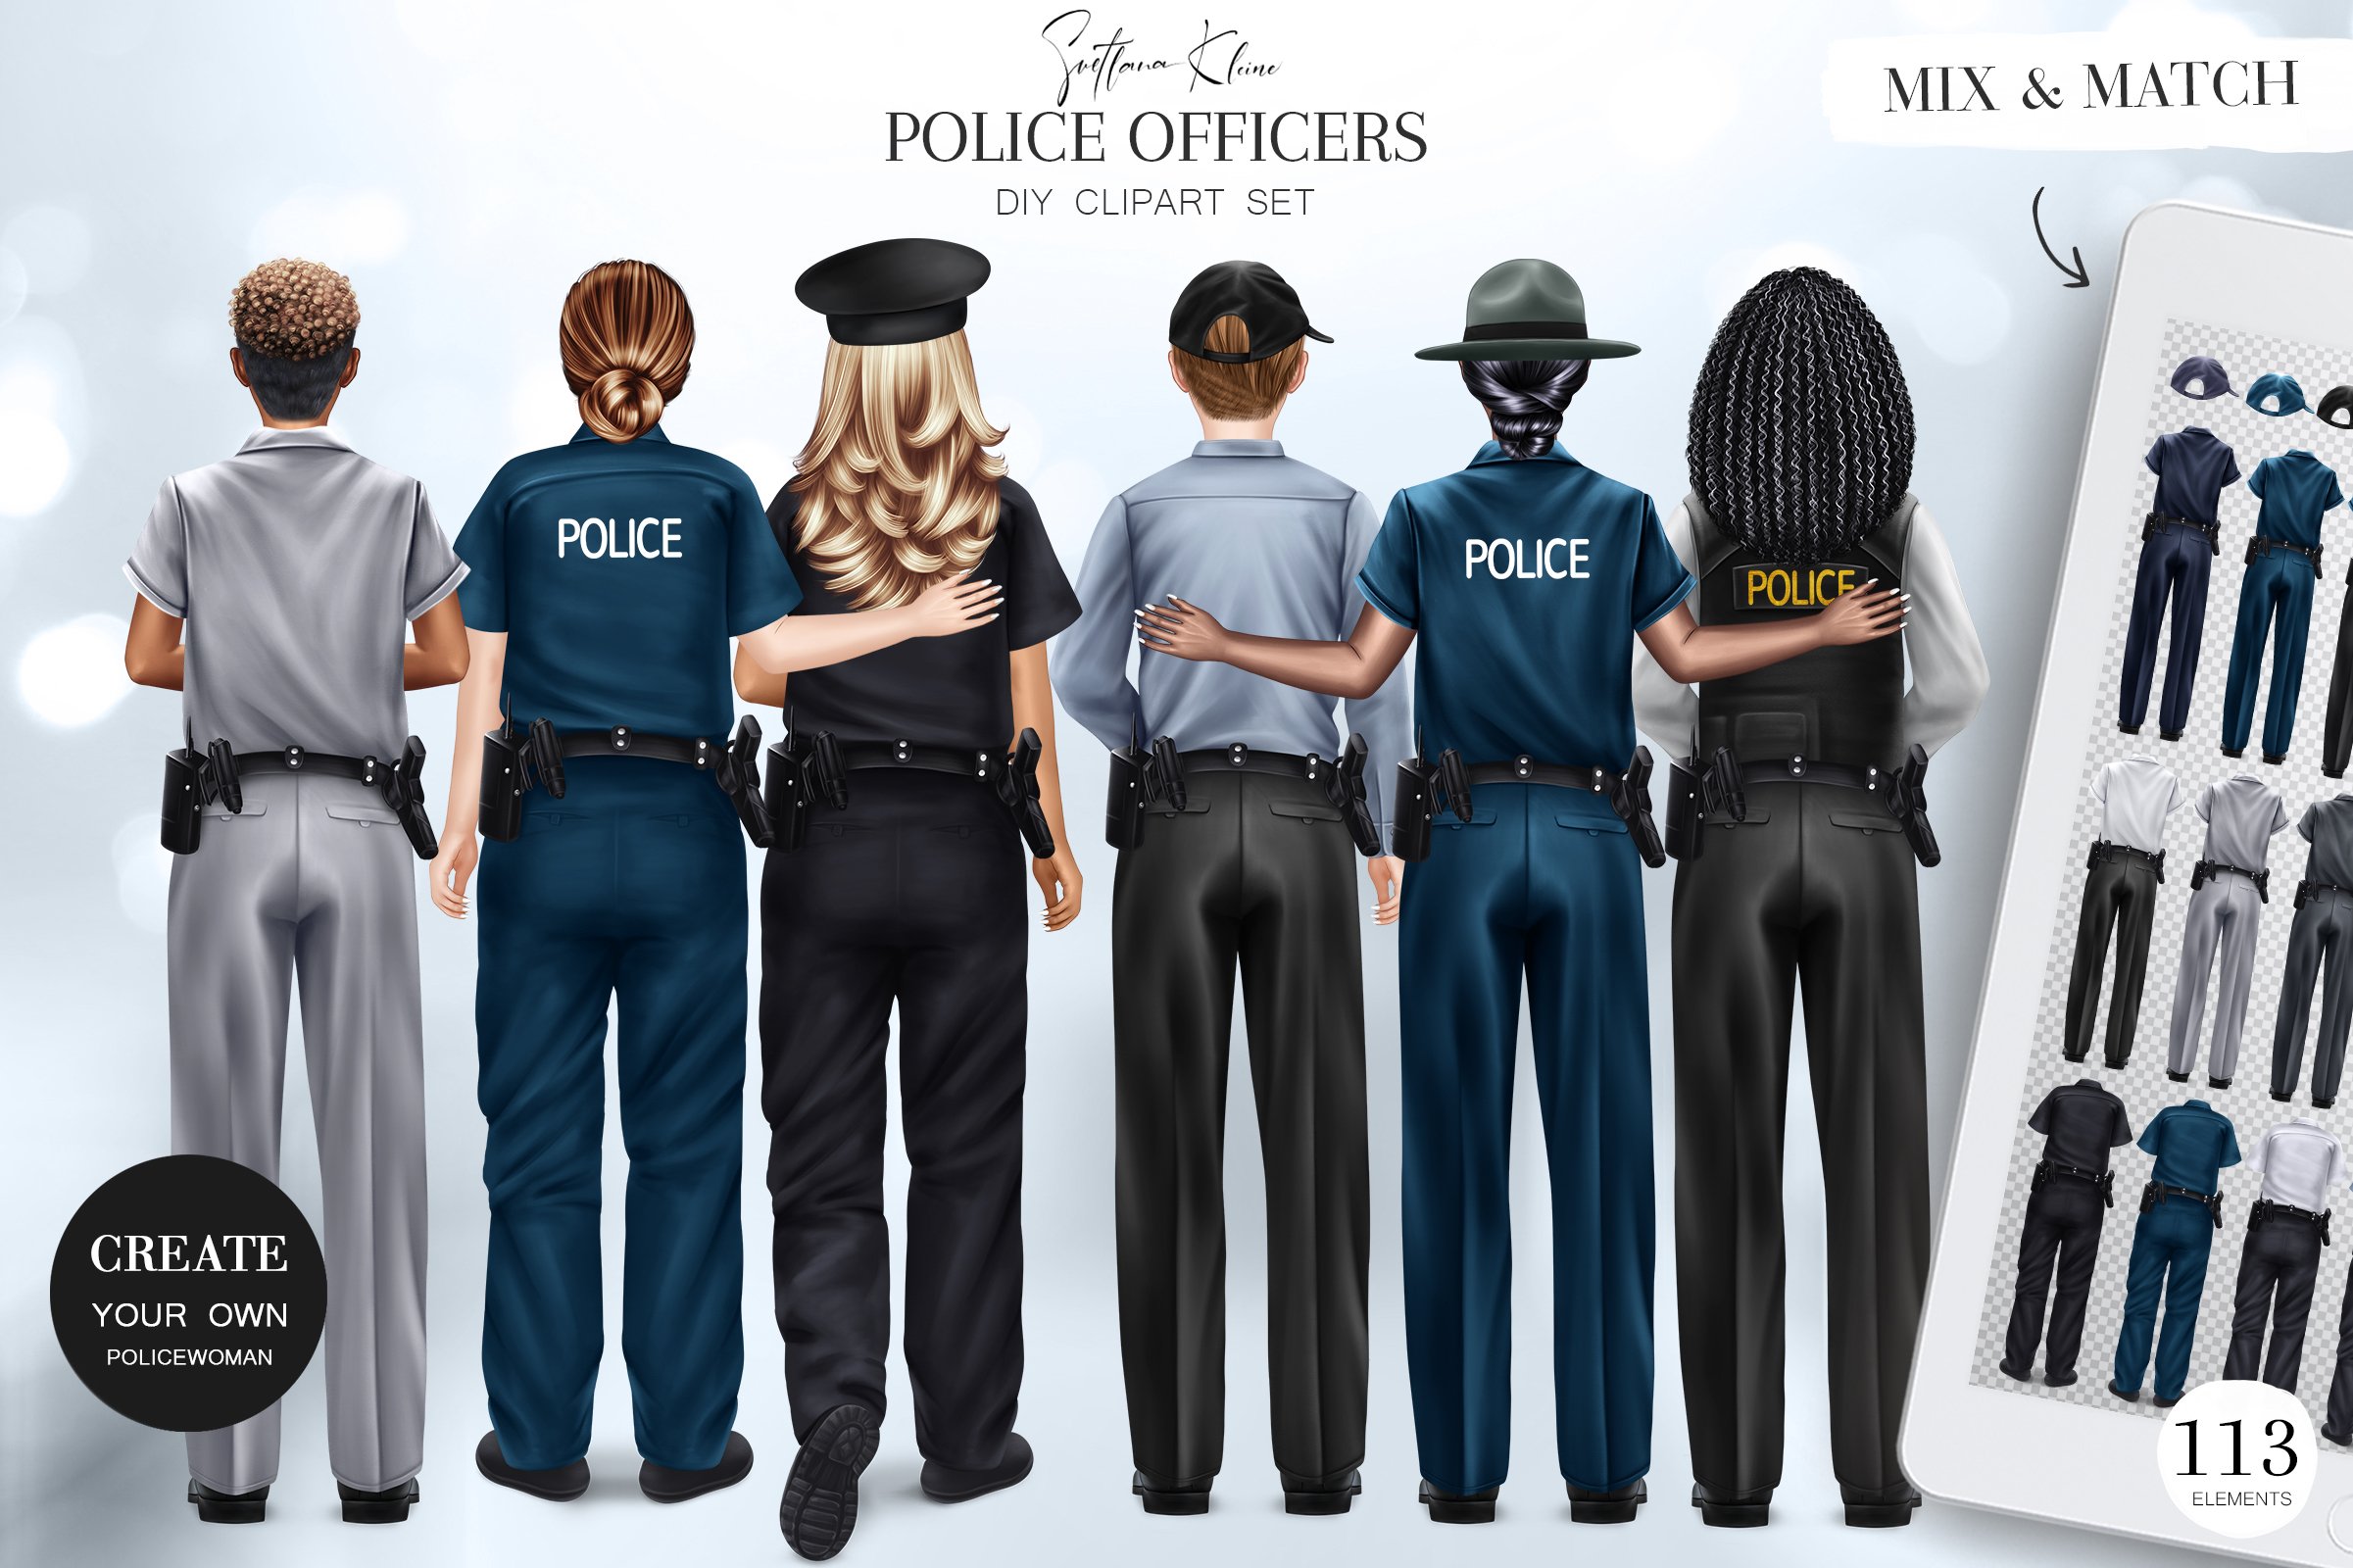 The black lettering "Police officers" and 6 police officers standing behind - 2 men in gray shirts with gray and black trousers, and 2 women in black shirts and trousers, and 2 women in blue shirts and trousers.